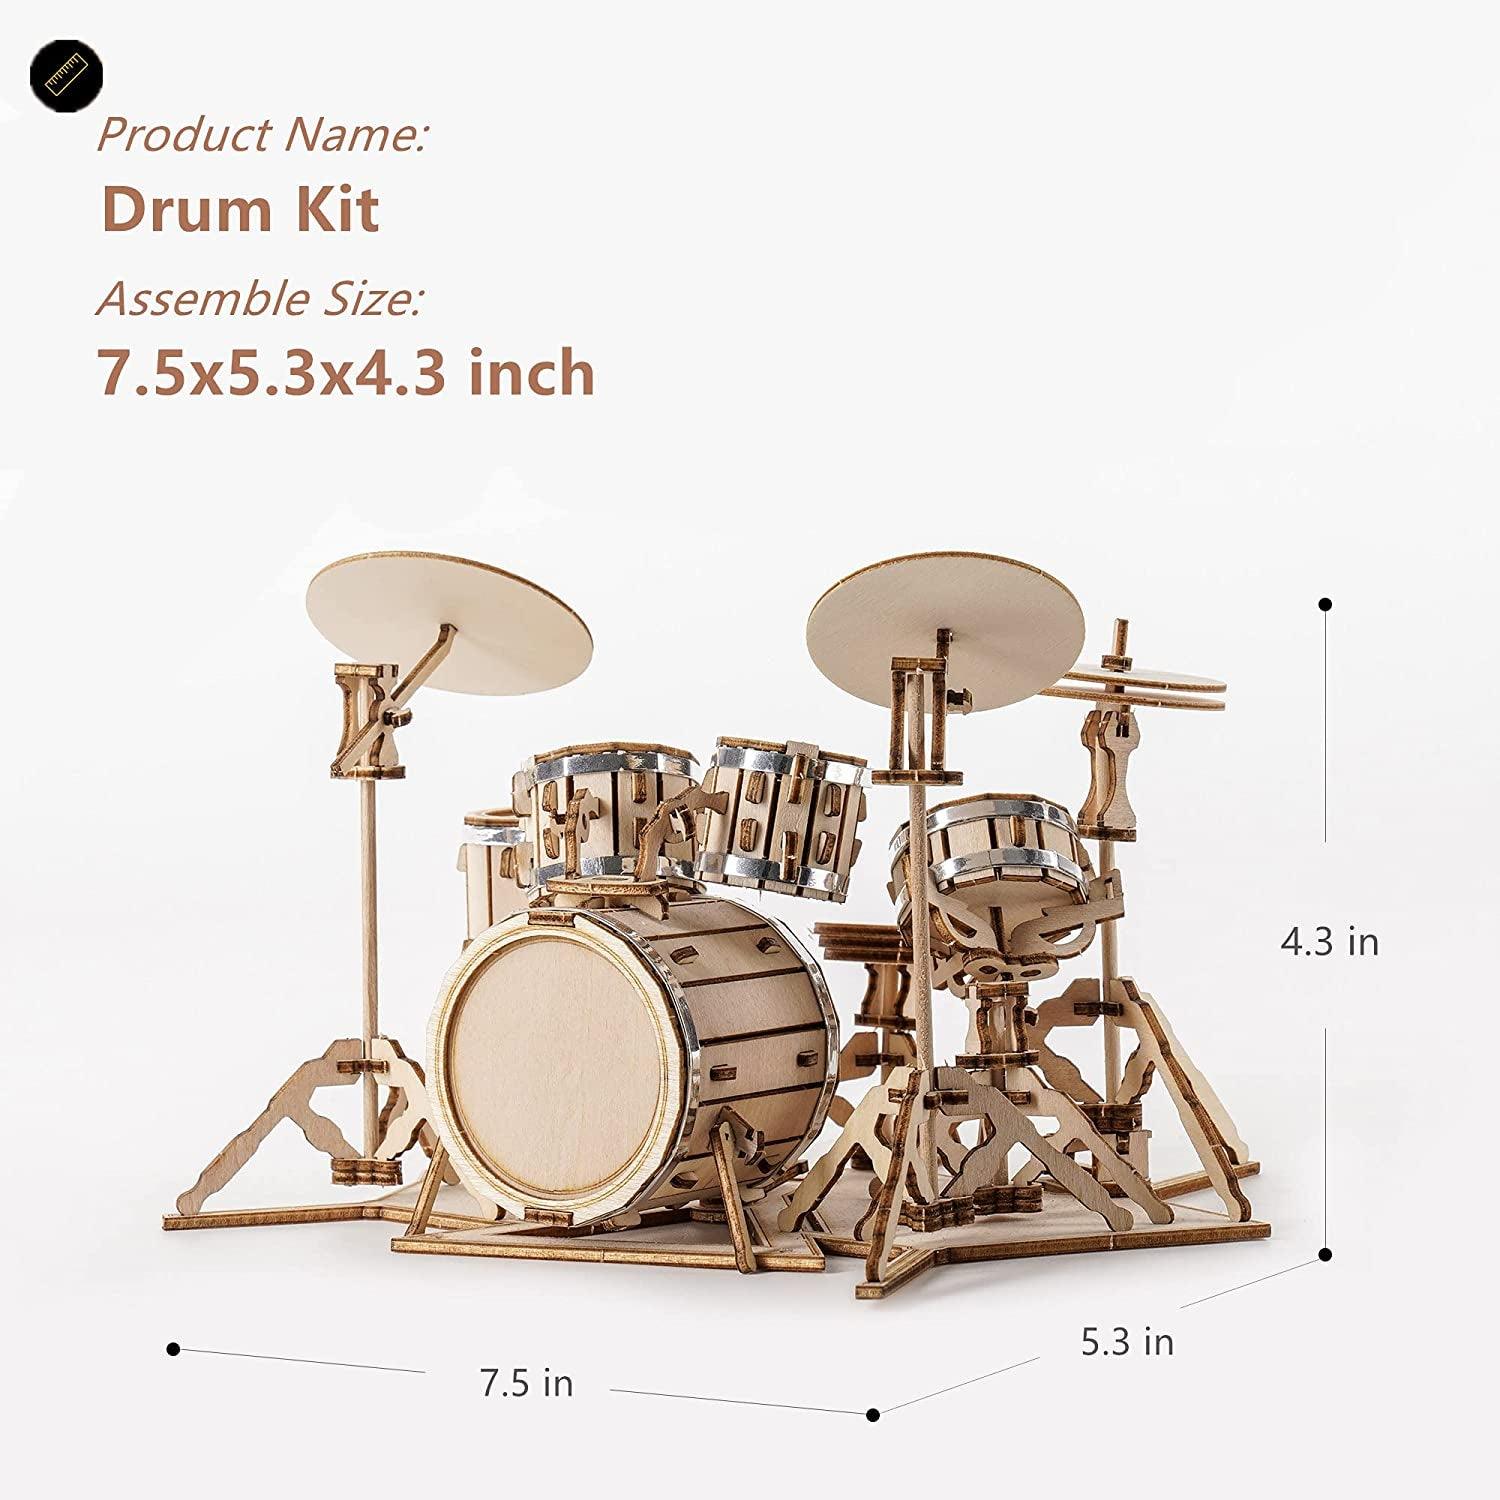 Wooden Craft Kits for Kids 3D Wooden Puzzle DIY Model Drum Kit to Build - WoodArtSupply